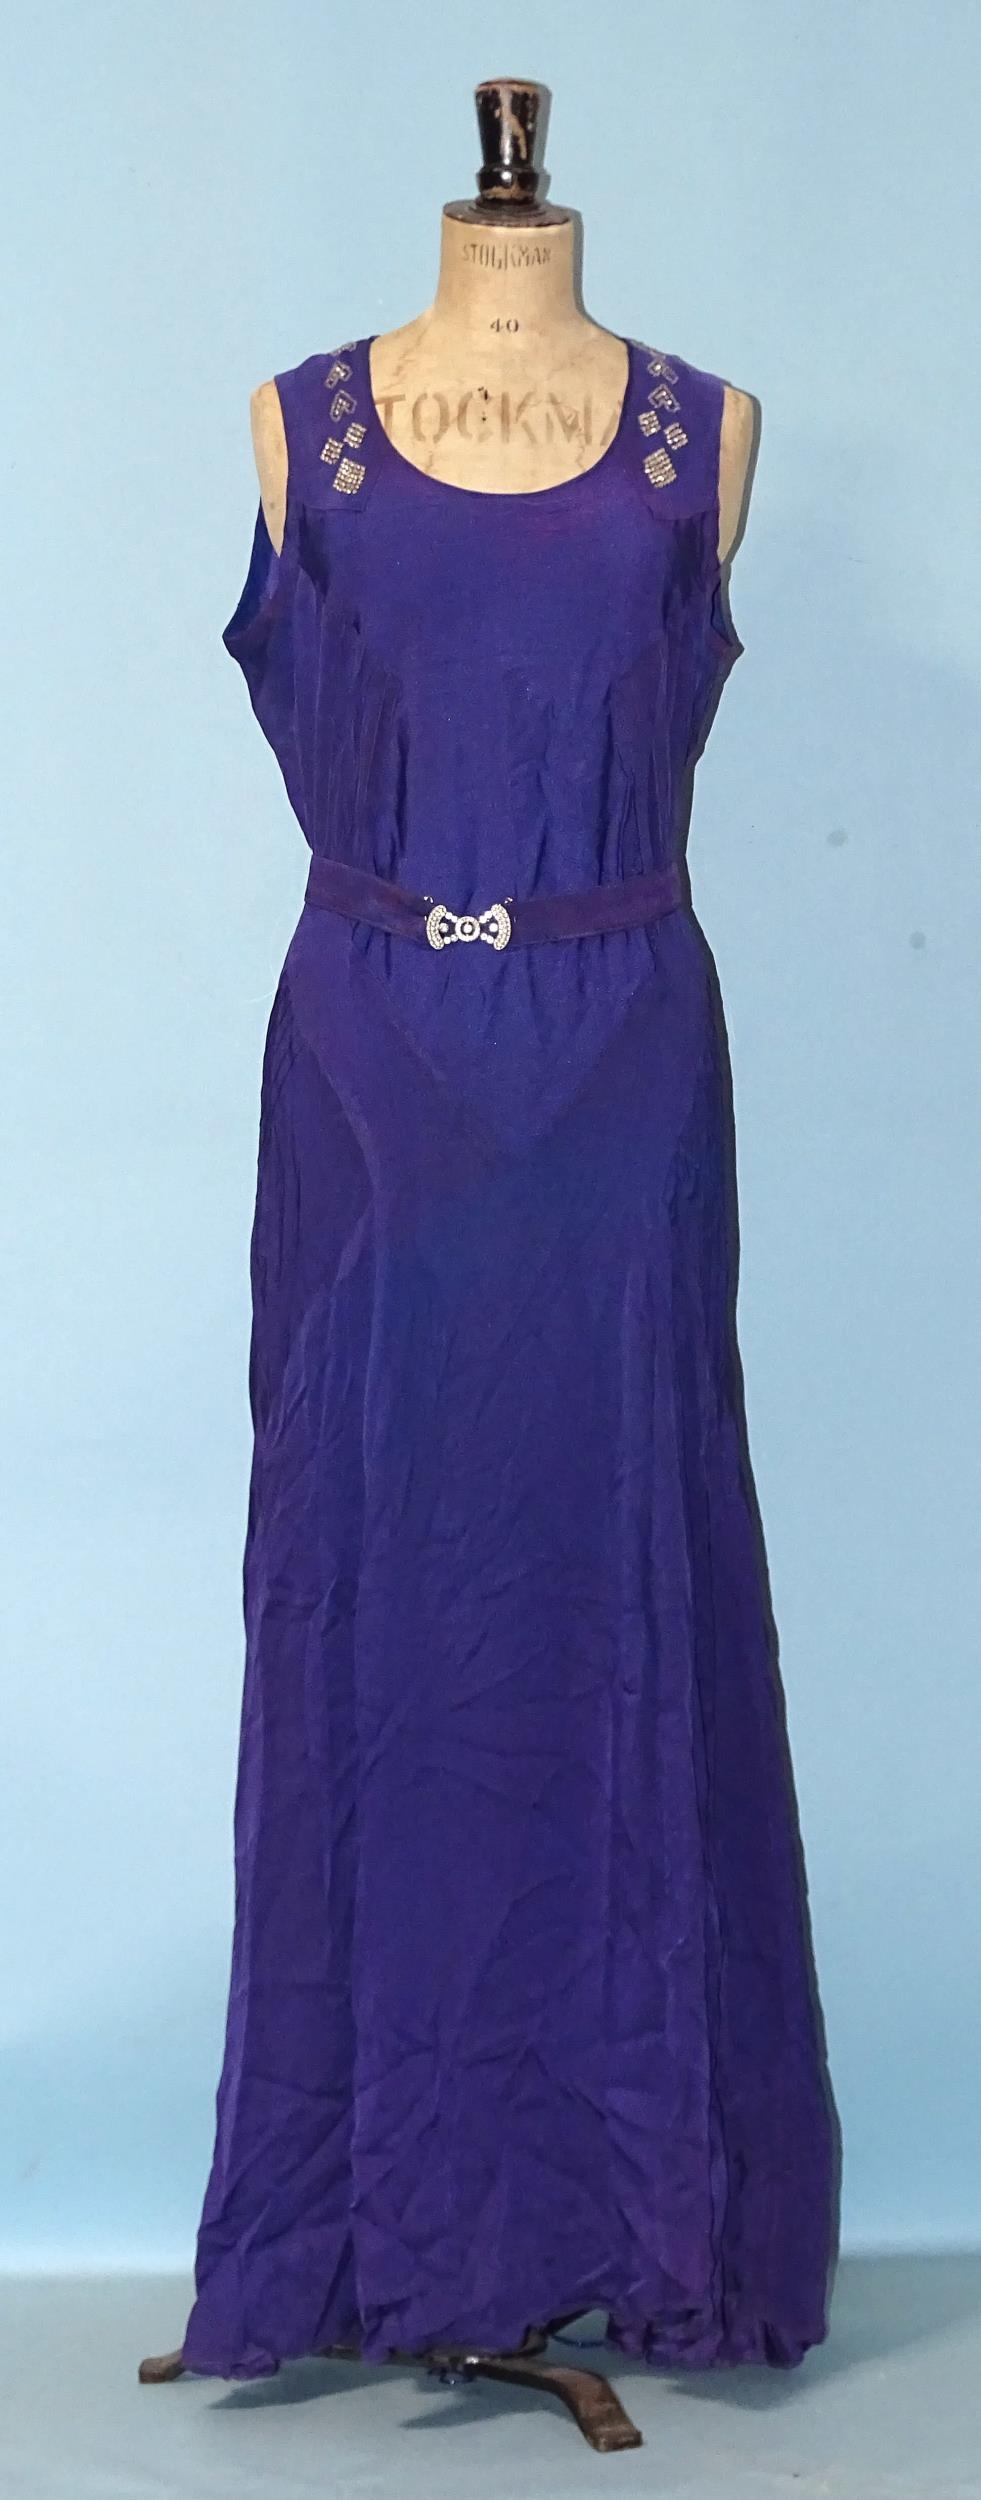 A 1930's evening dress of purple satin-like material, sleeveless, with hand-beading to neckline, the